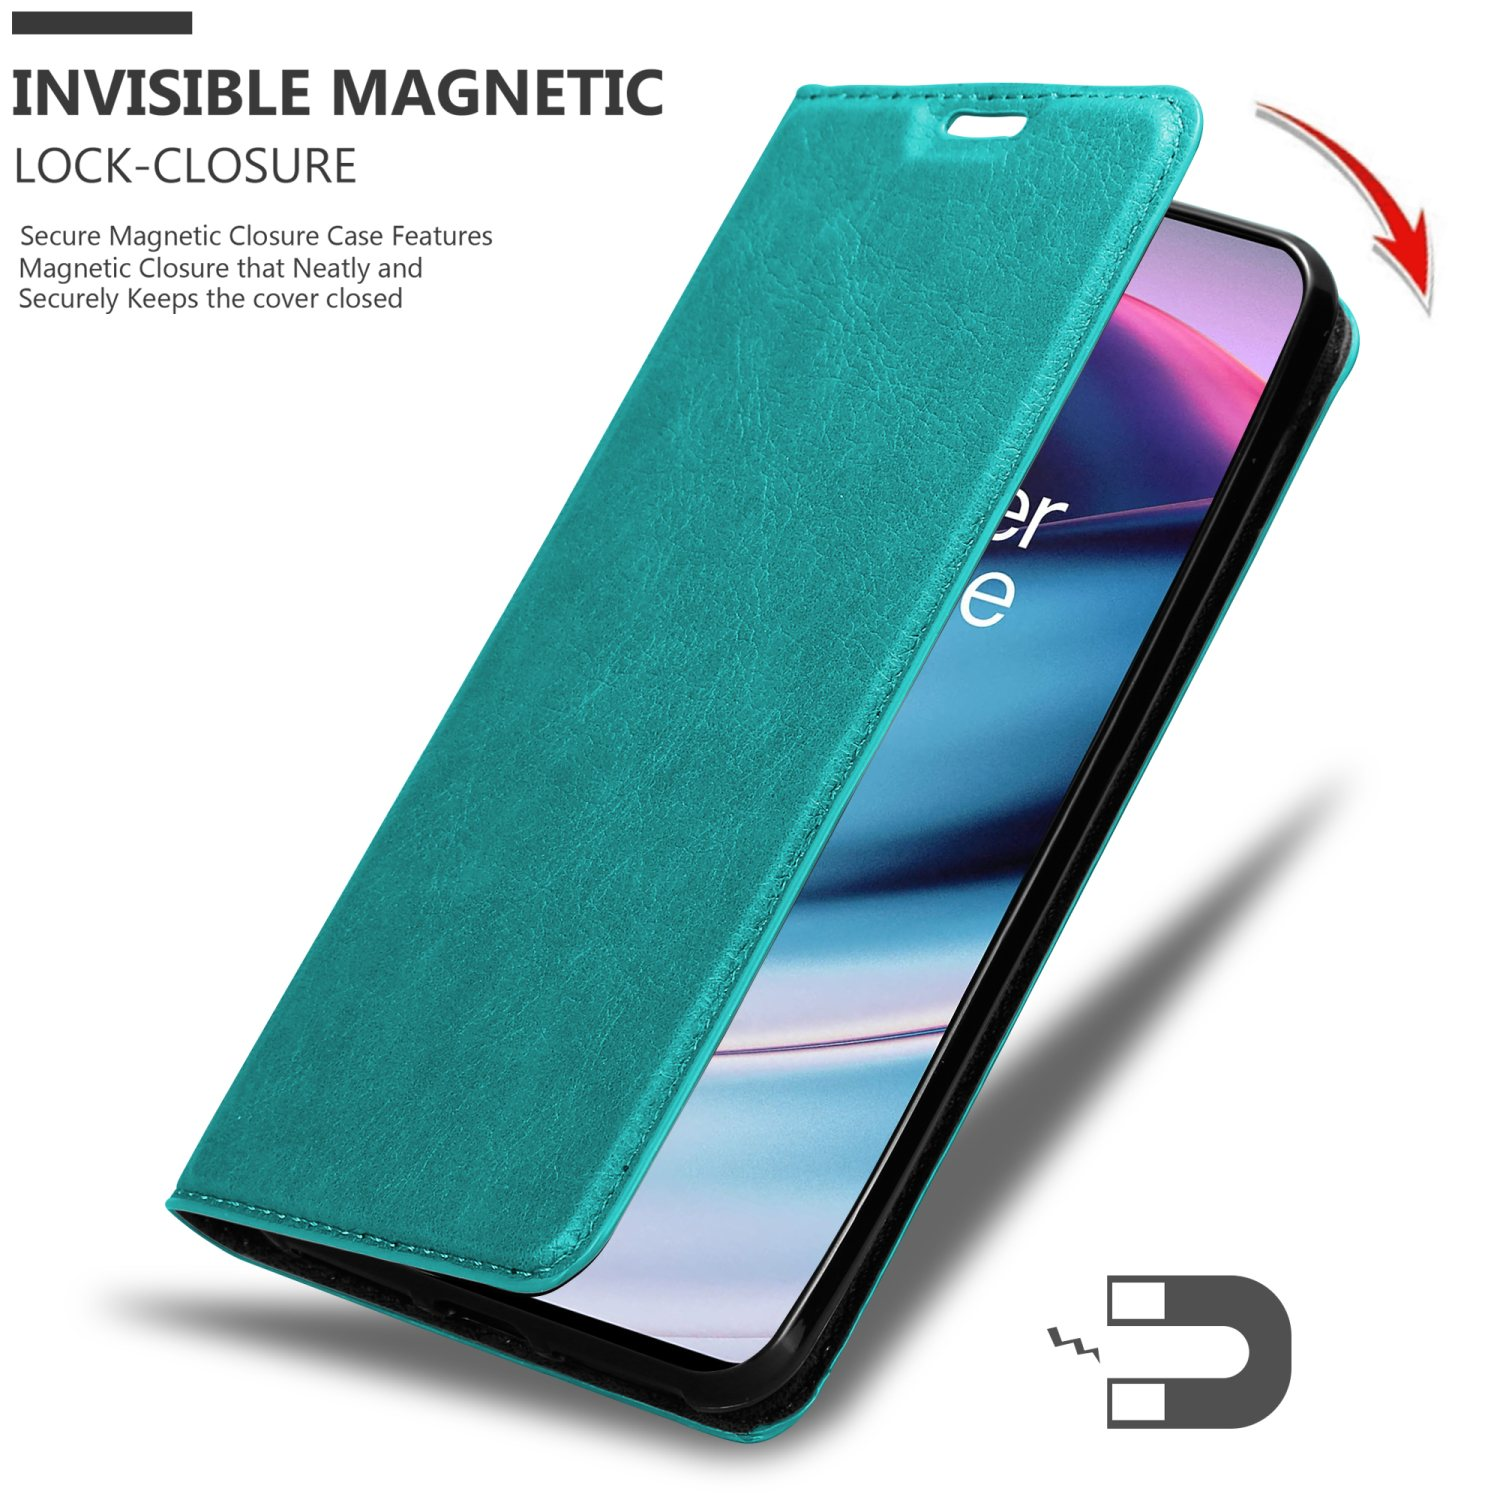 CE Magnet, Book CADORABO TÜRKIS Bookcover, OnePlus, Invisible 5G, Nord Hülle PETROL